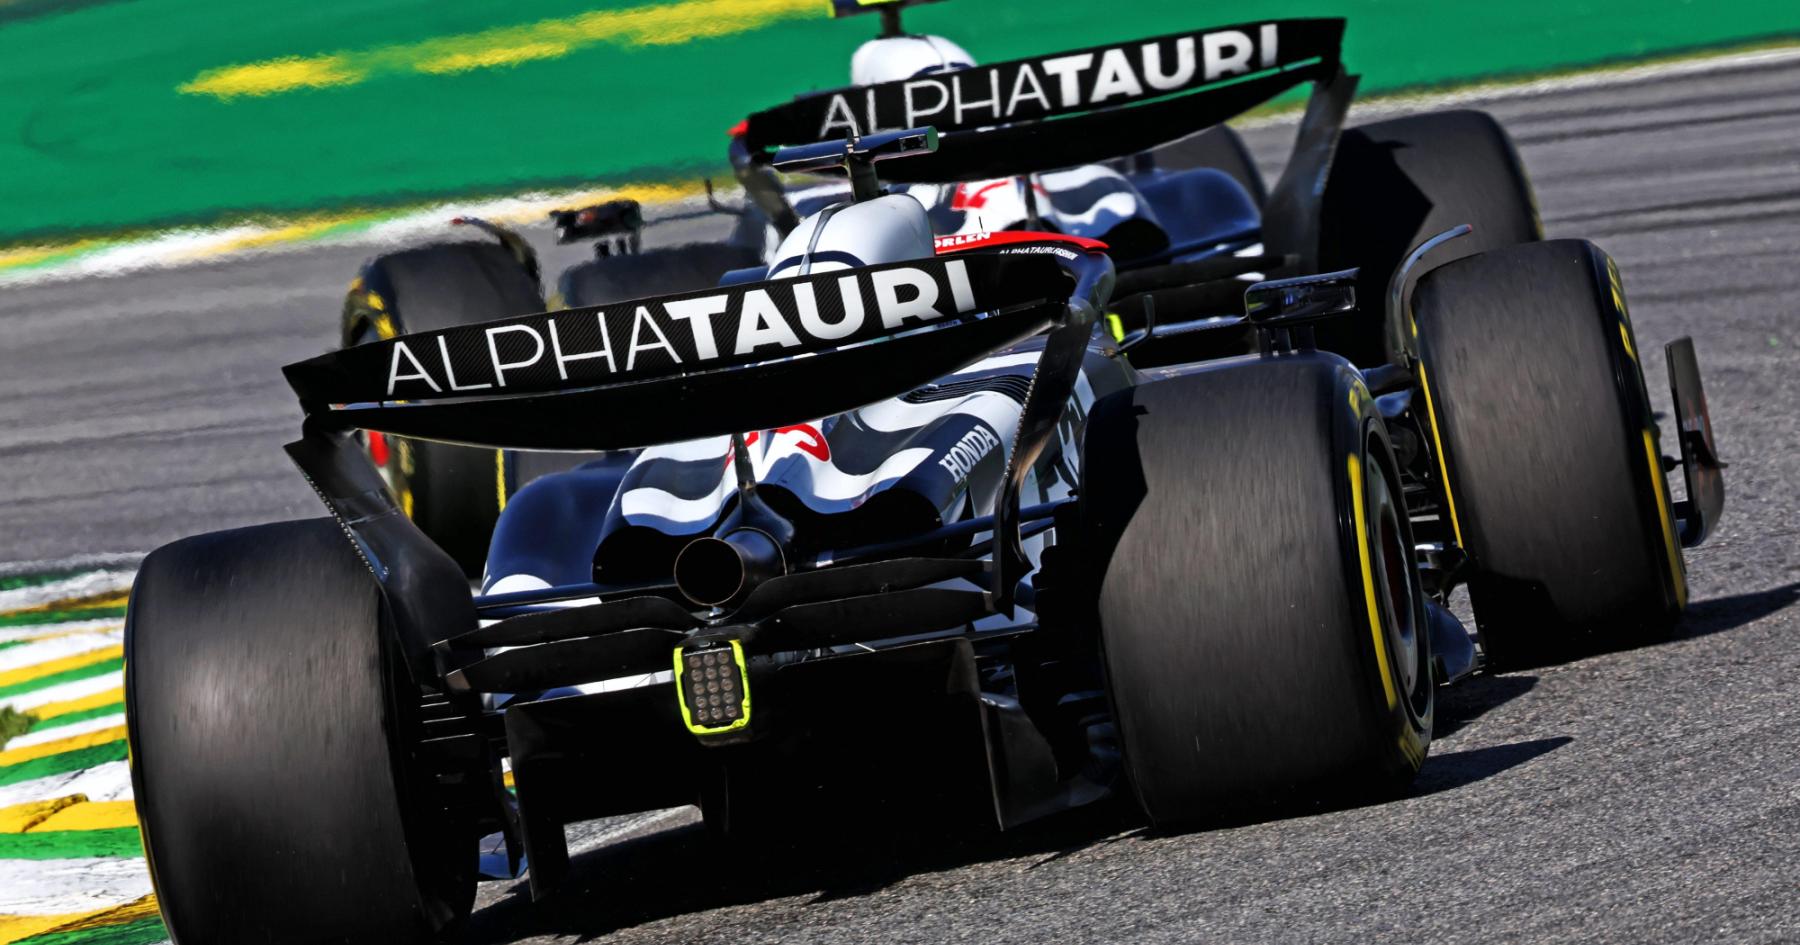 AlphaTauri takes the fast lane with stunning new F1 name!